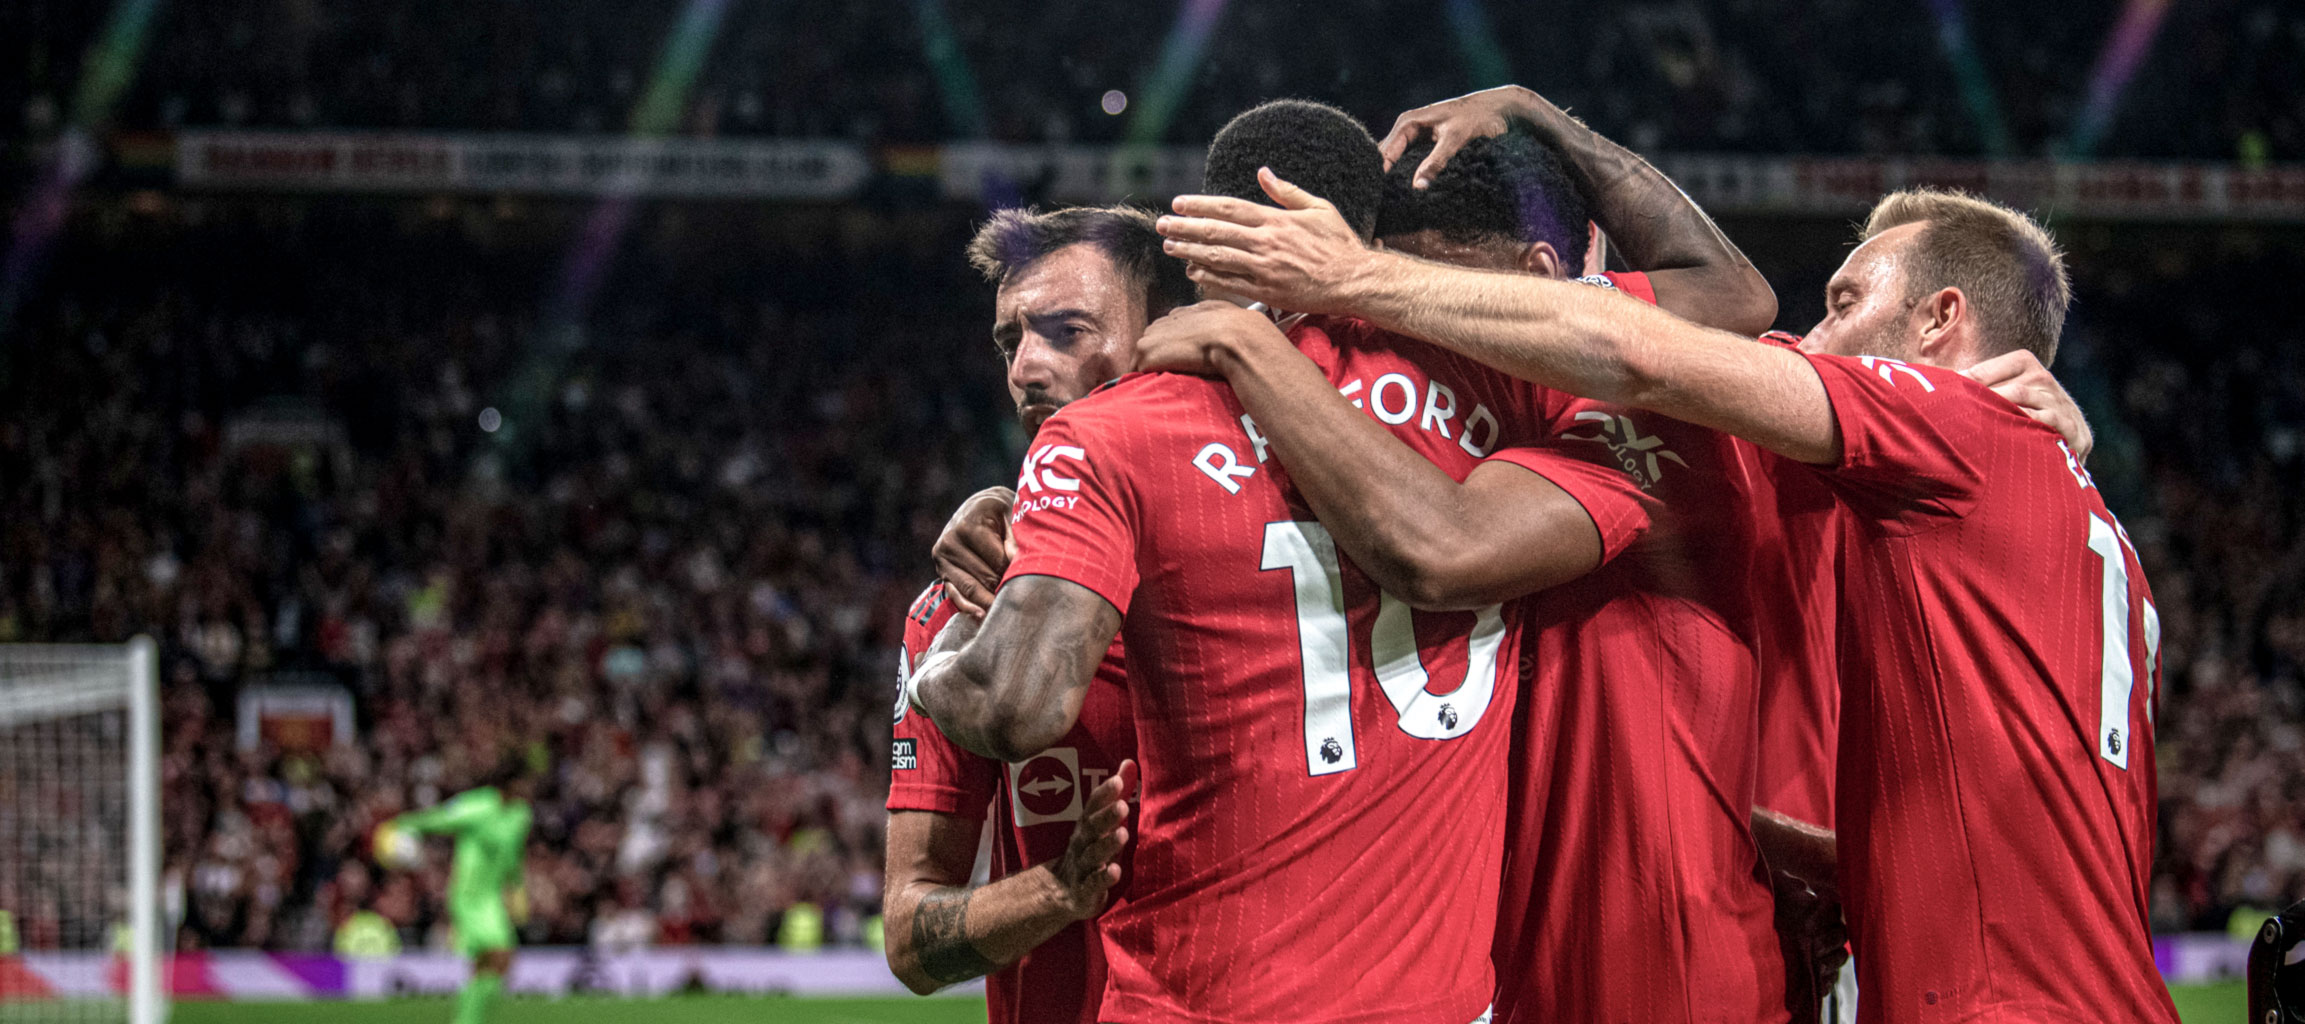 Manchester United 2 Liverpool 1: Premier League tactical analysis